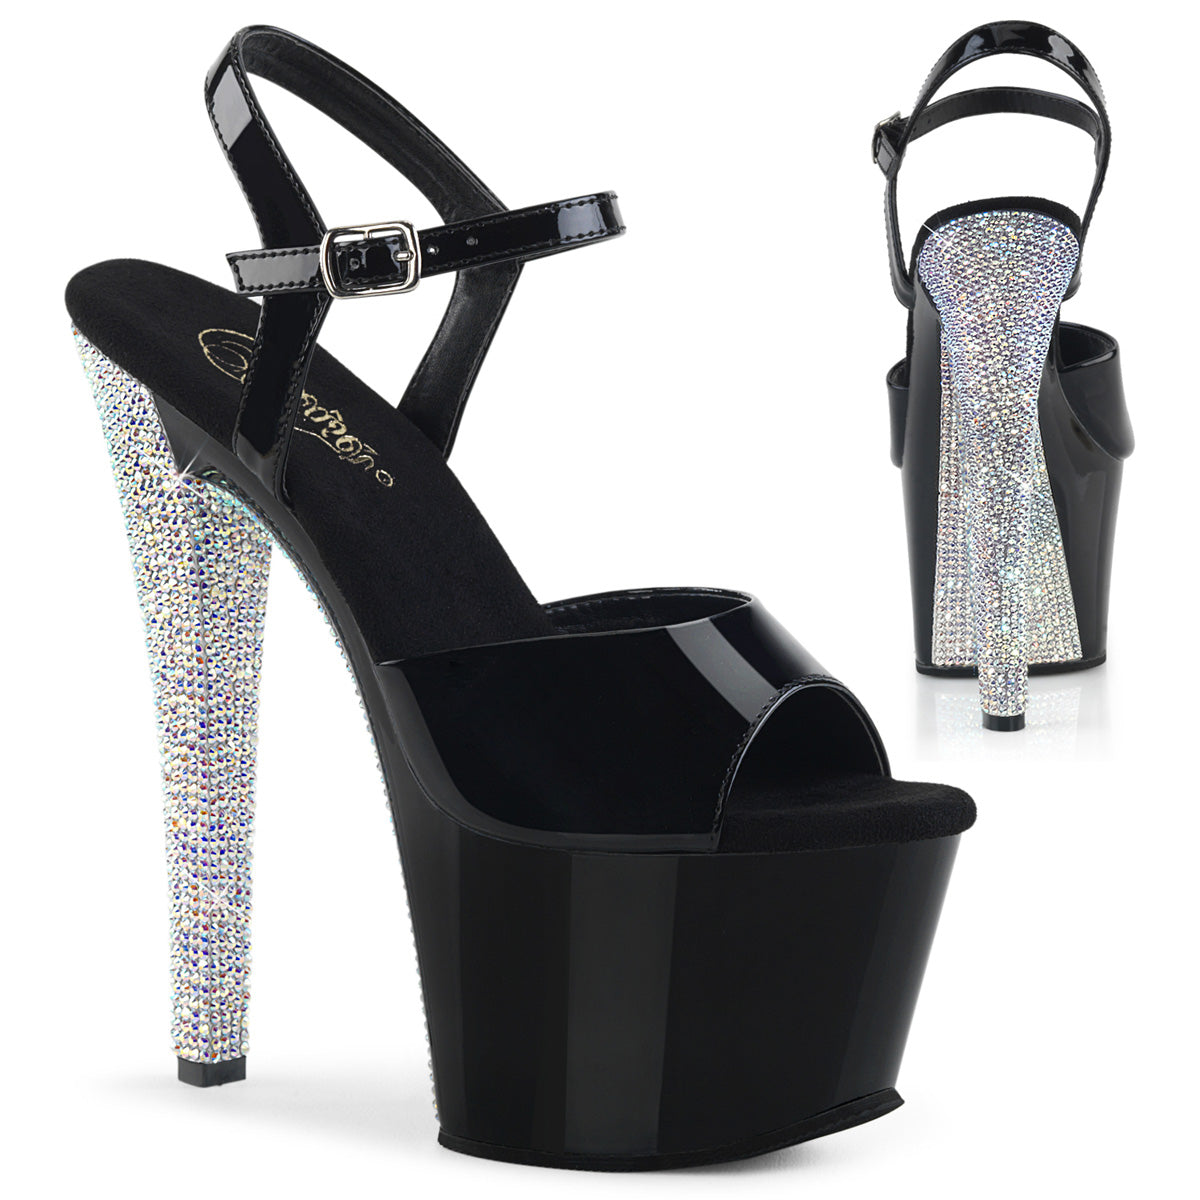 SKY-309CHRS 7" Heel Black and Silver Pole Dancing Platforms-Pleaser- Sexy Shoes